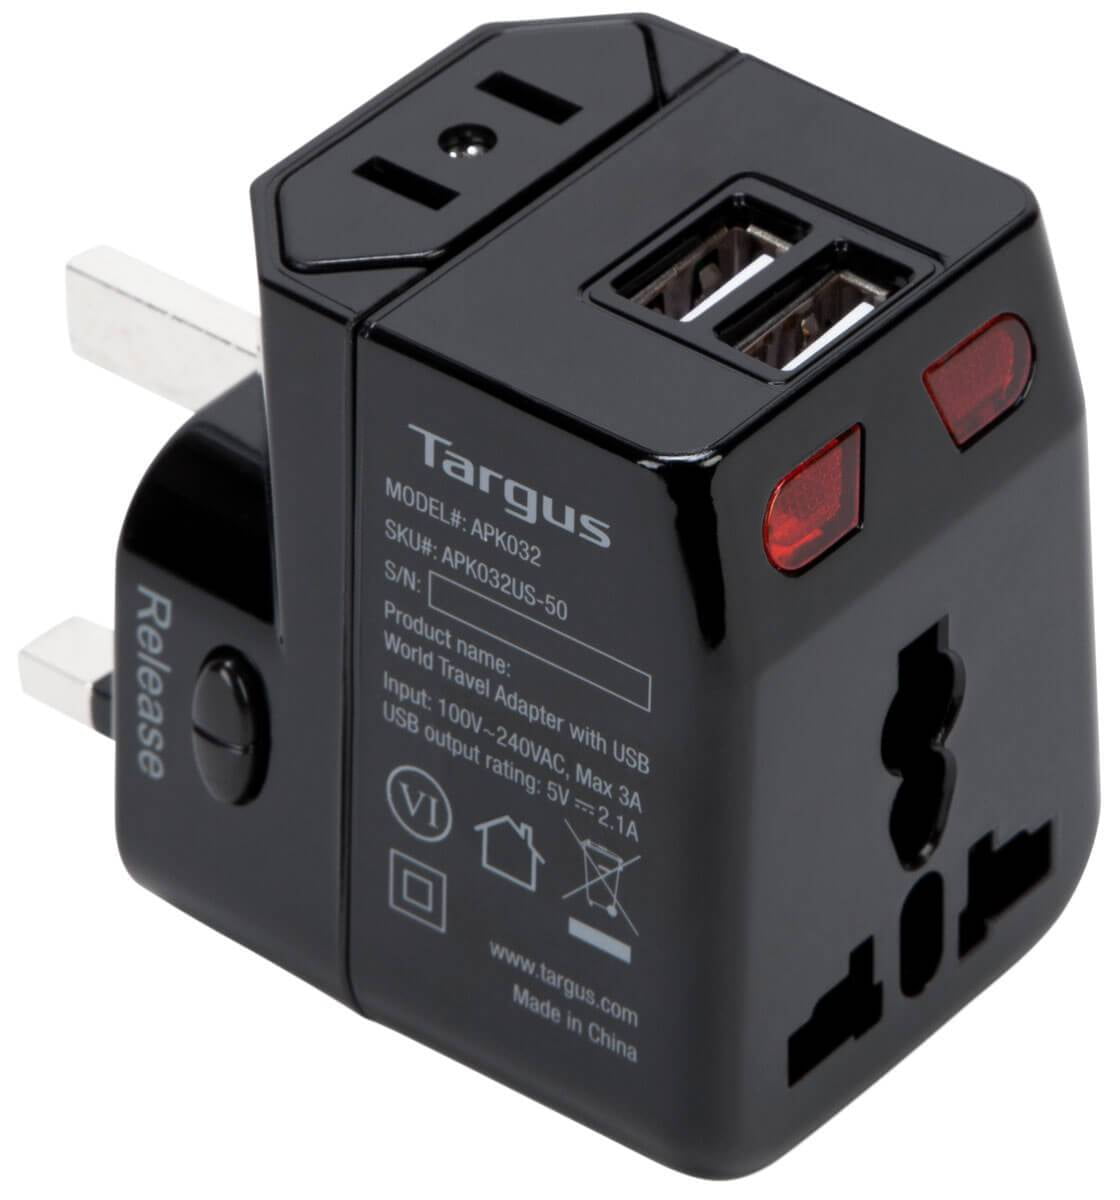 Worldwide Wall Charger with 3.4A Dual USB Ports for USA EU UK AUS and More Nekteck Universal International Travel Power Adapter